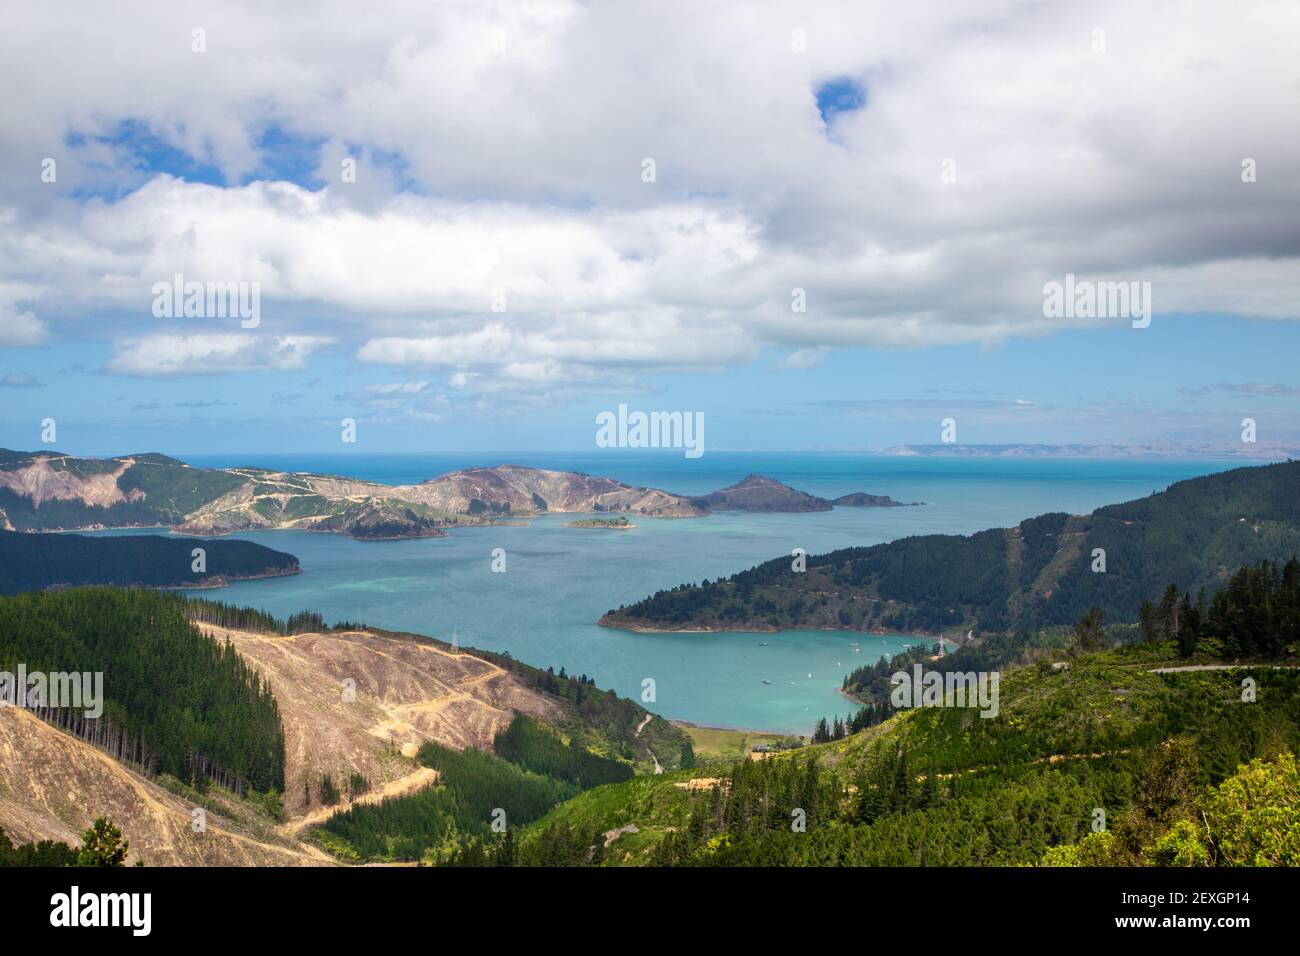 The view looking down on Port Underwood from the windy road to Picton, Marlborough Sounds, New Zealand Stock Photo